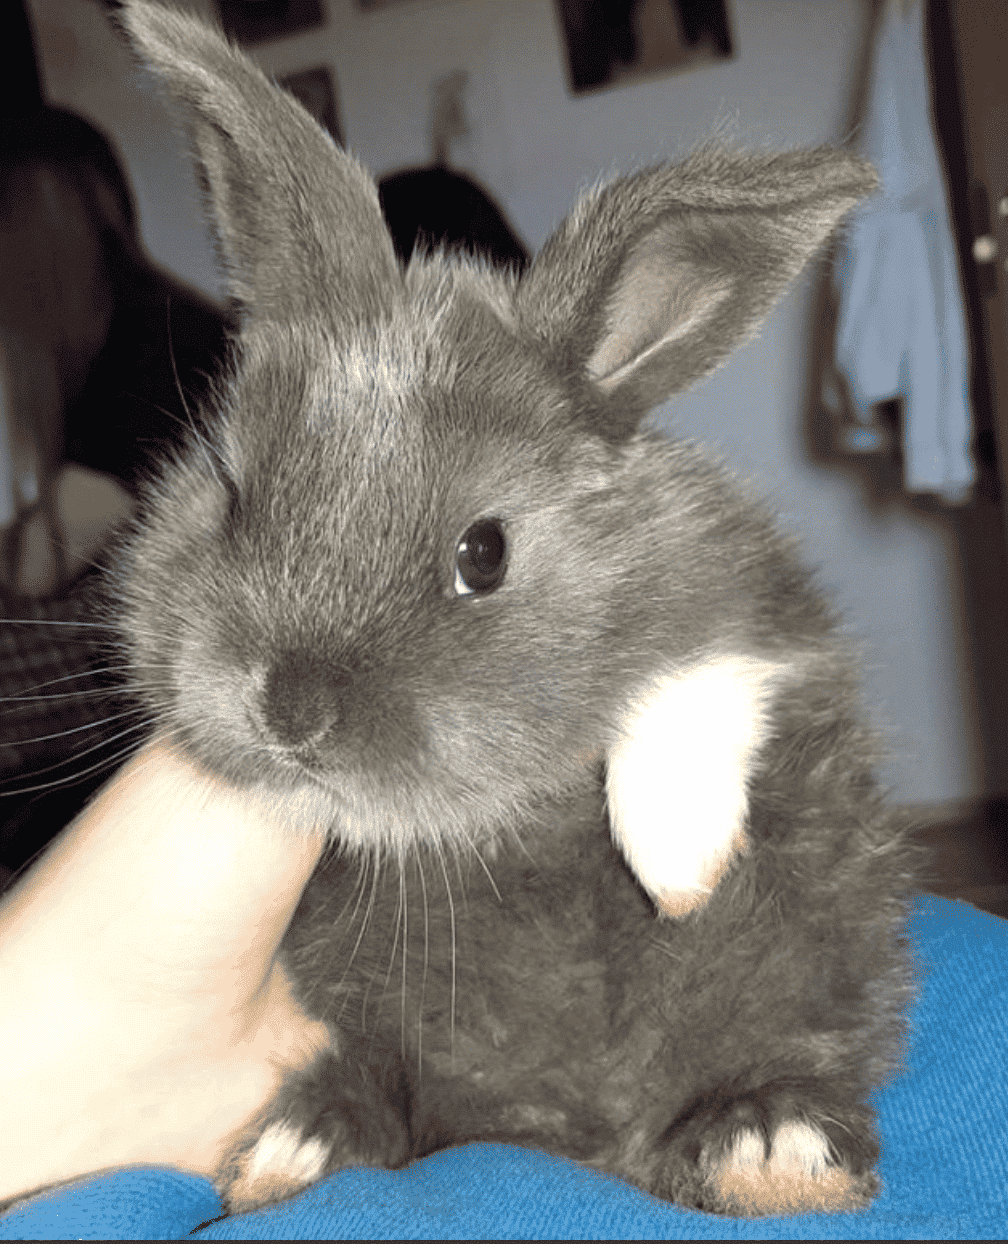 Rabbit Rescue Hops to Rehome Sixty Bunnies